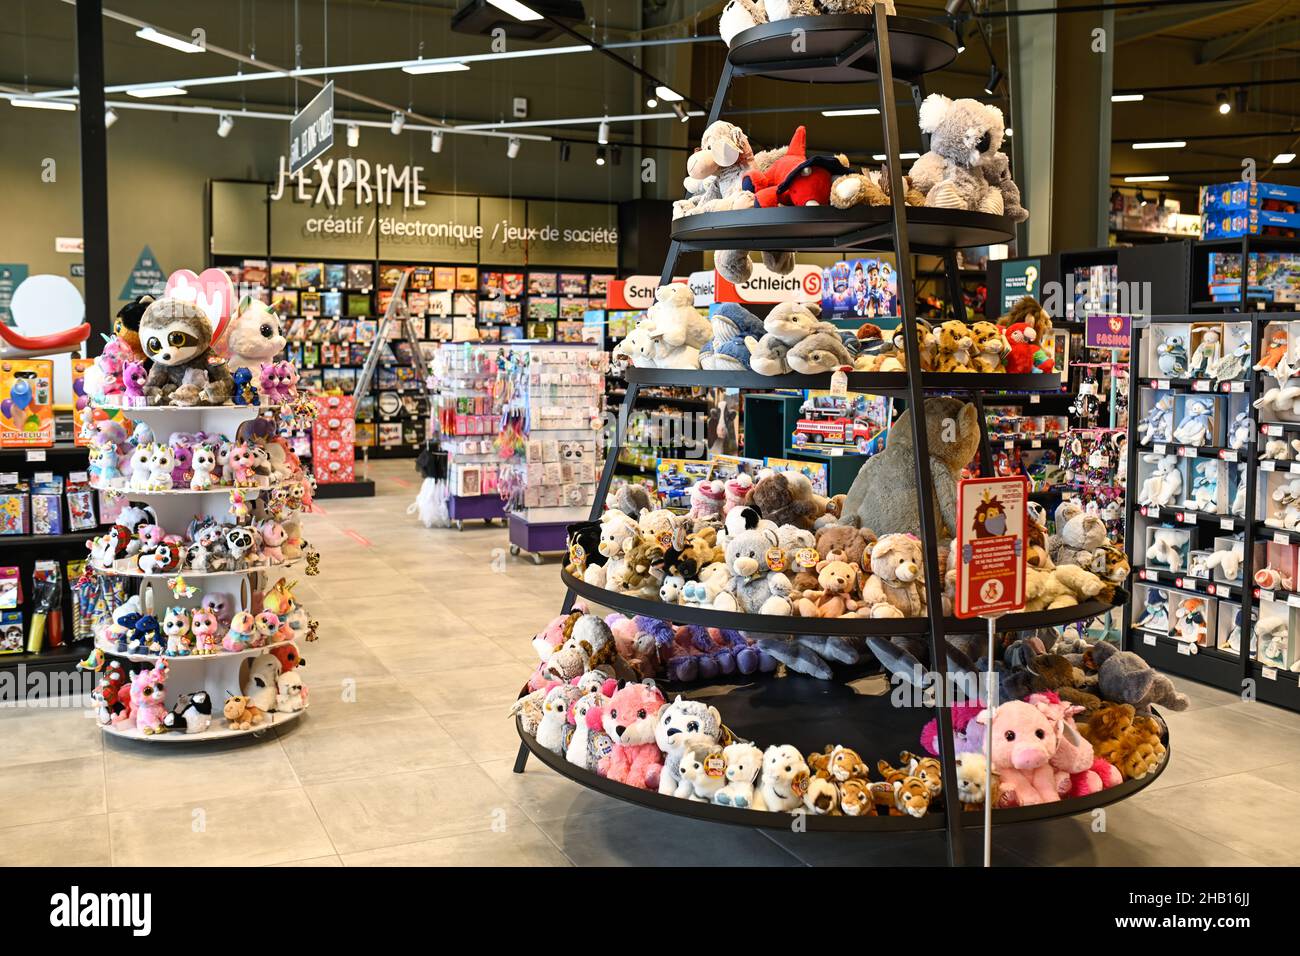 King Jouet toy store in the shopping mall “Steel” in Saint-Etienne (south-eastern France) Stock Photo